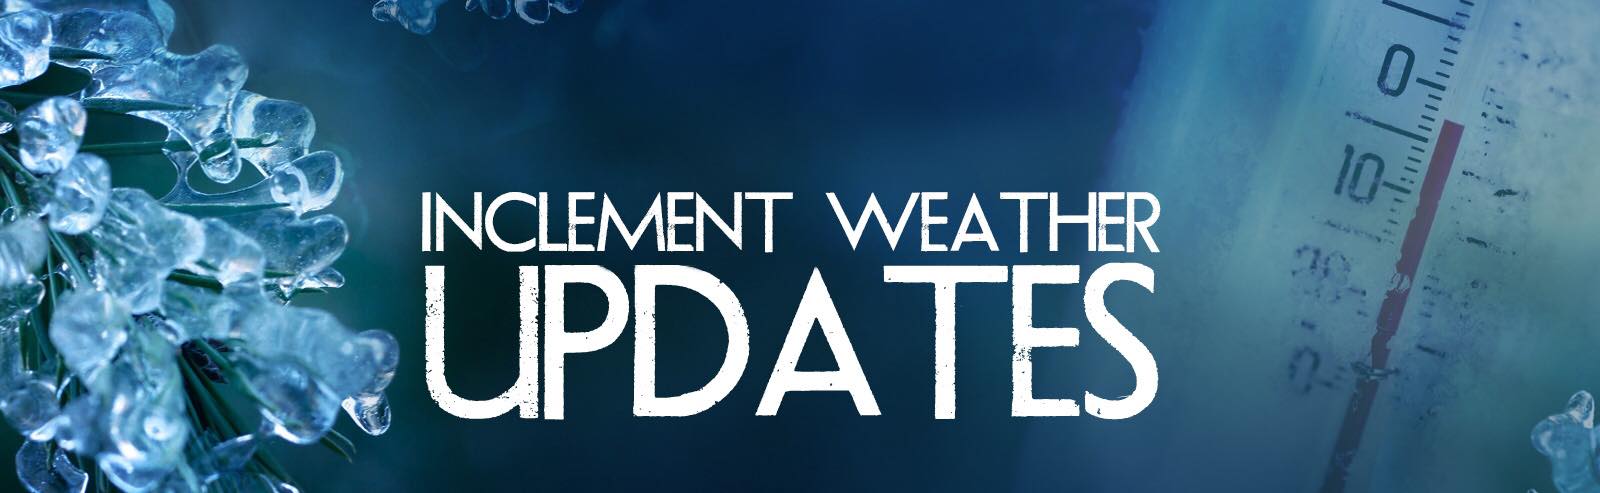 inclement weather updates Opens in new window